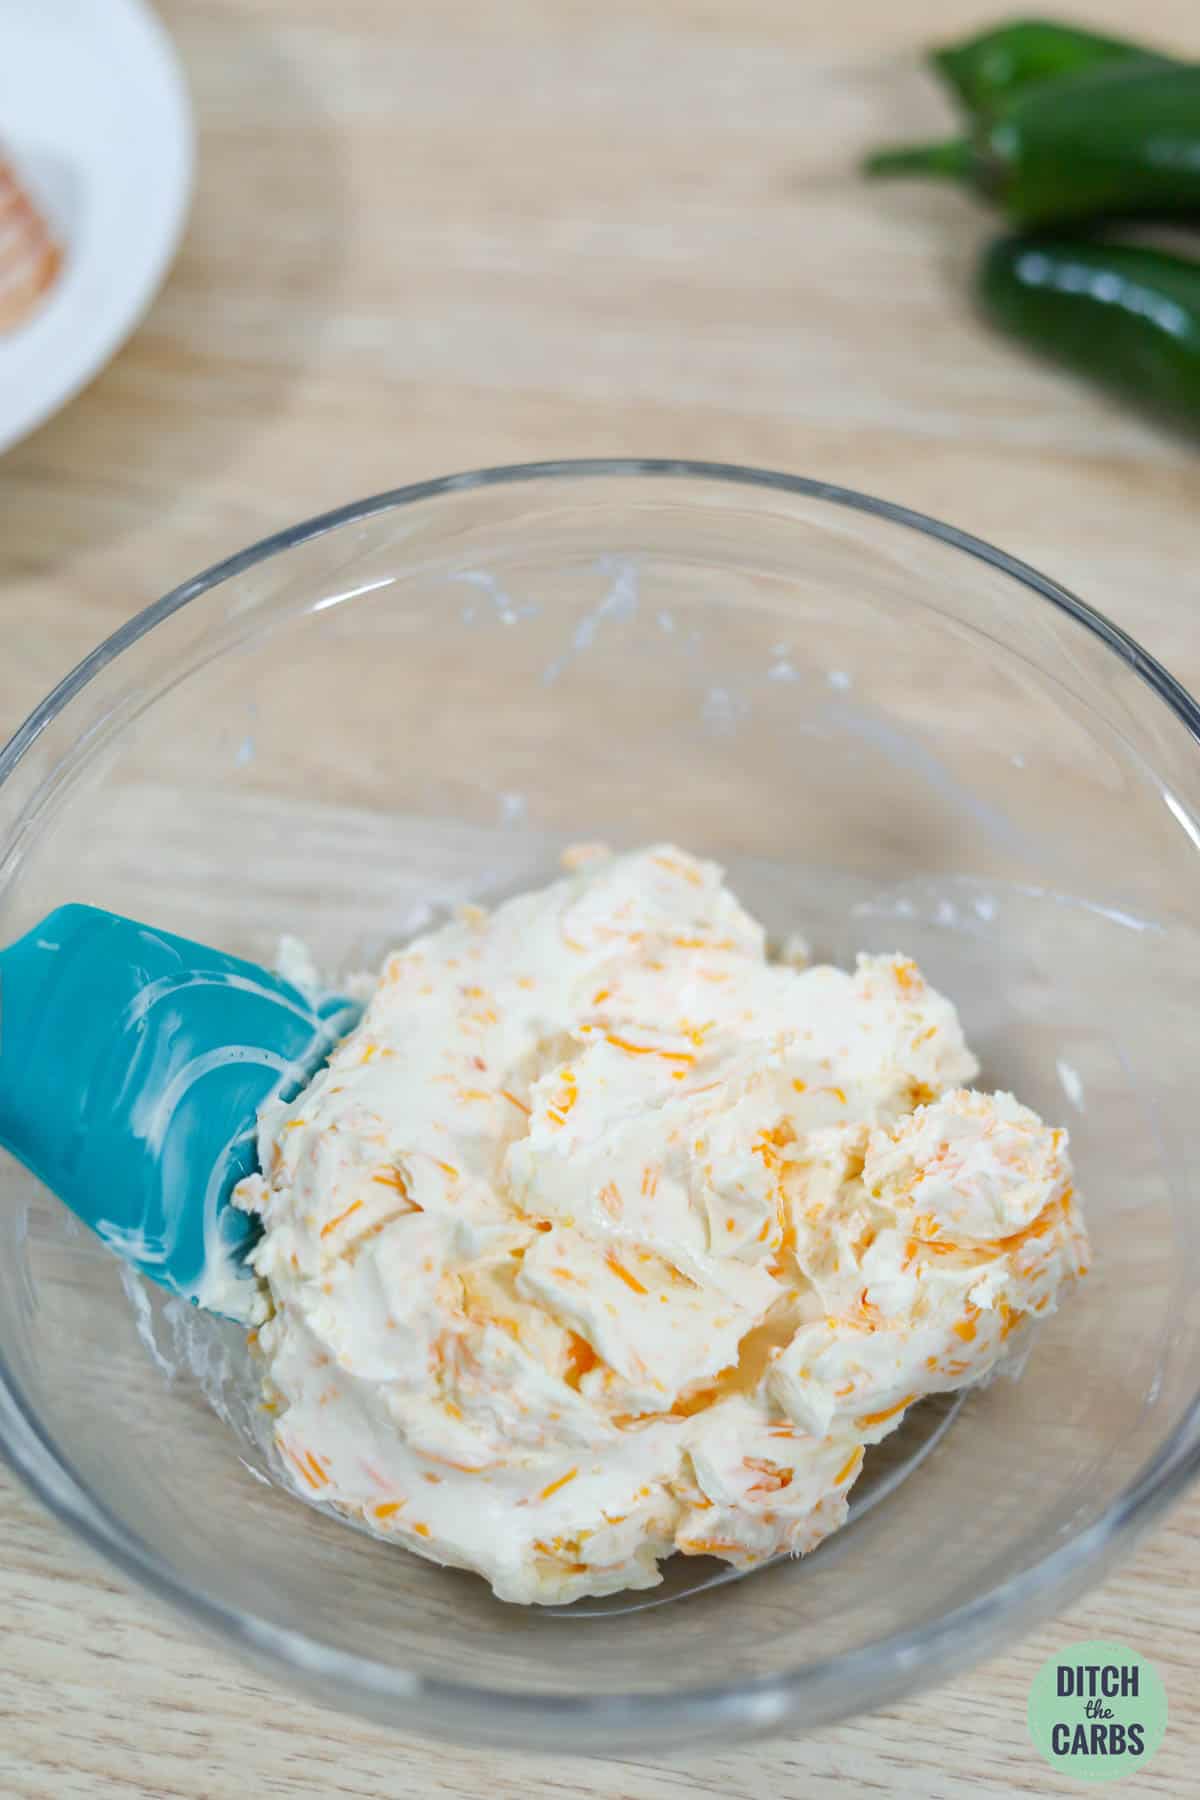 Mixing cream cheese with cheddar cheese